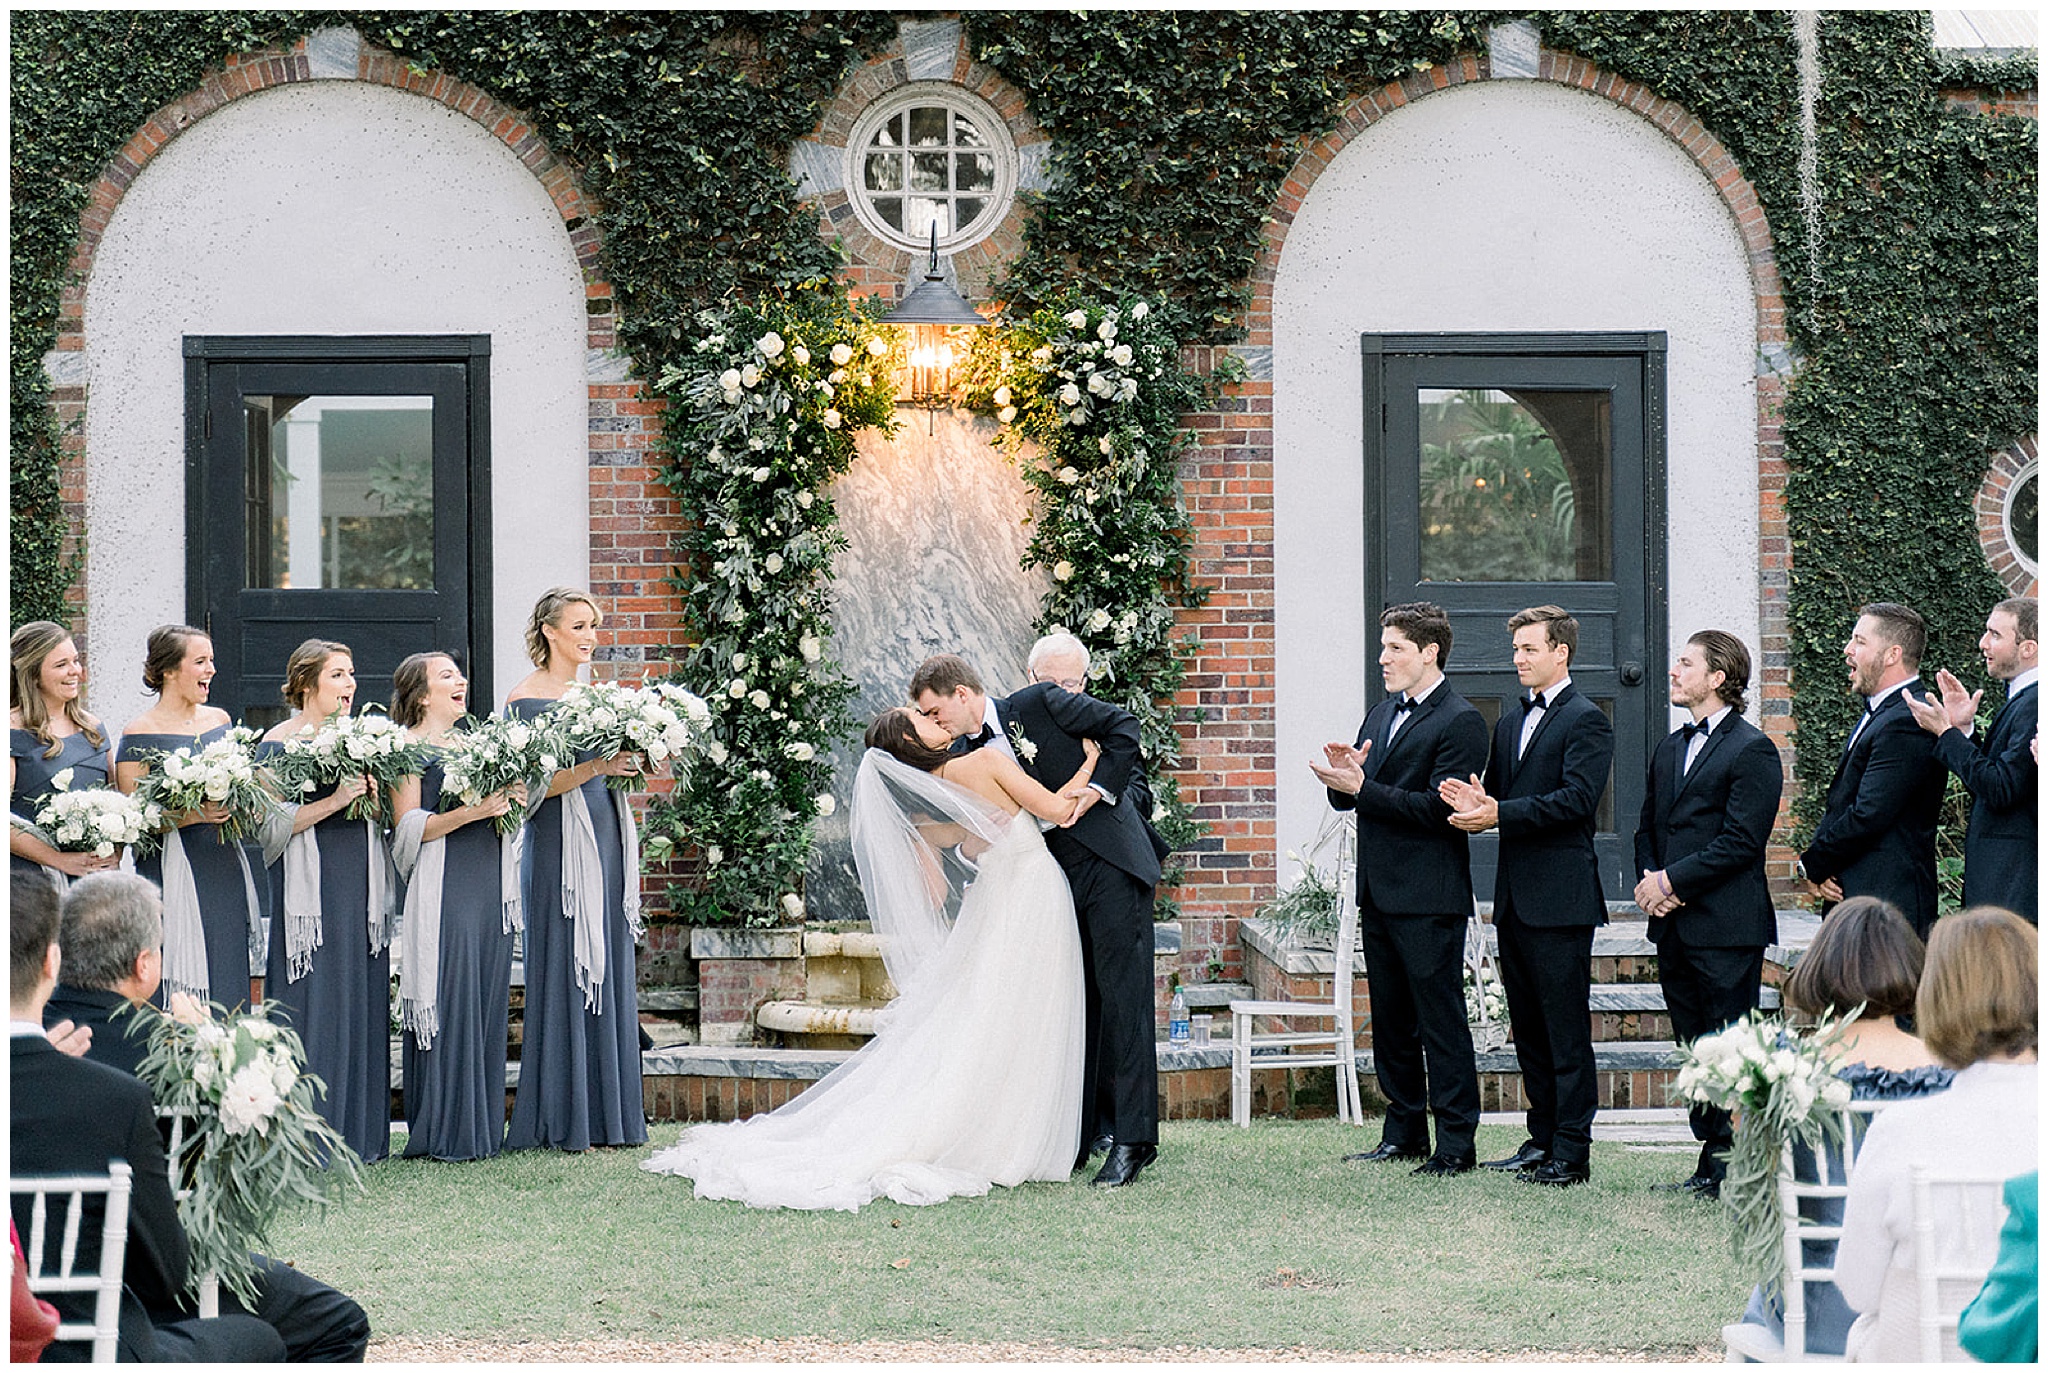 Newlyweds kiss for the first time as their wedding party and guests cheer in front of an ivy-covered brick wall with archways for doors